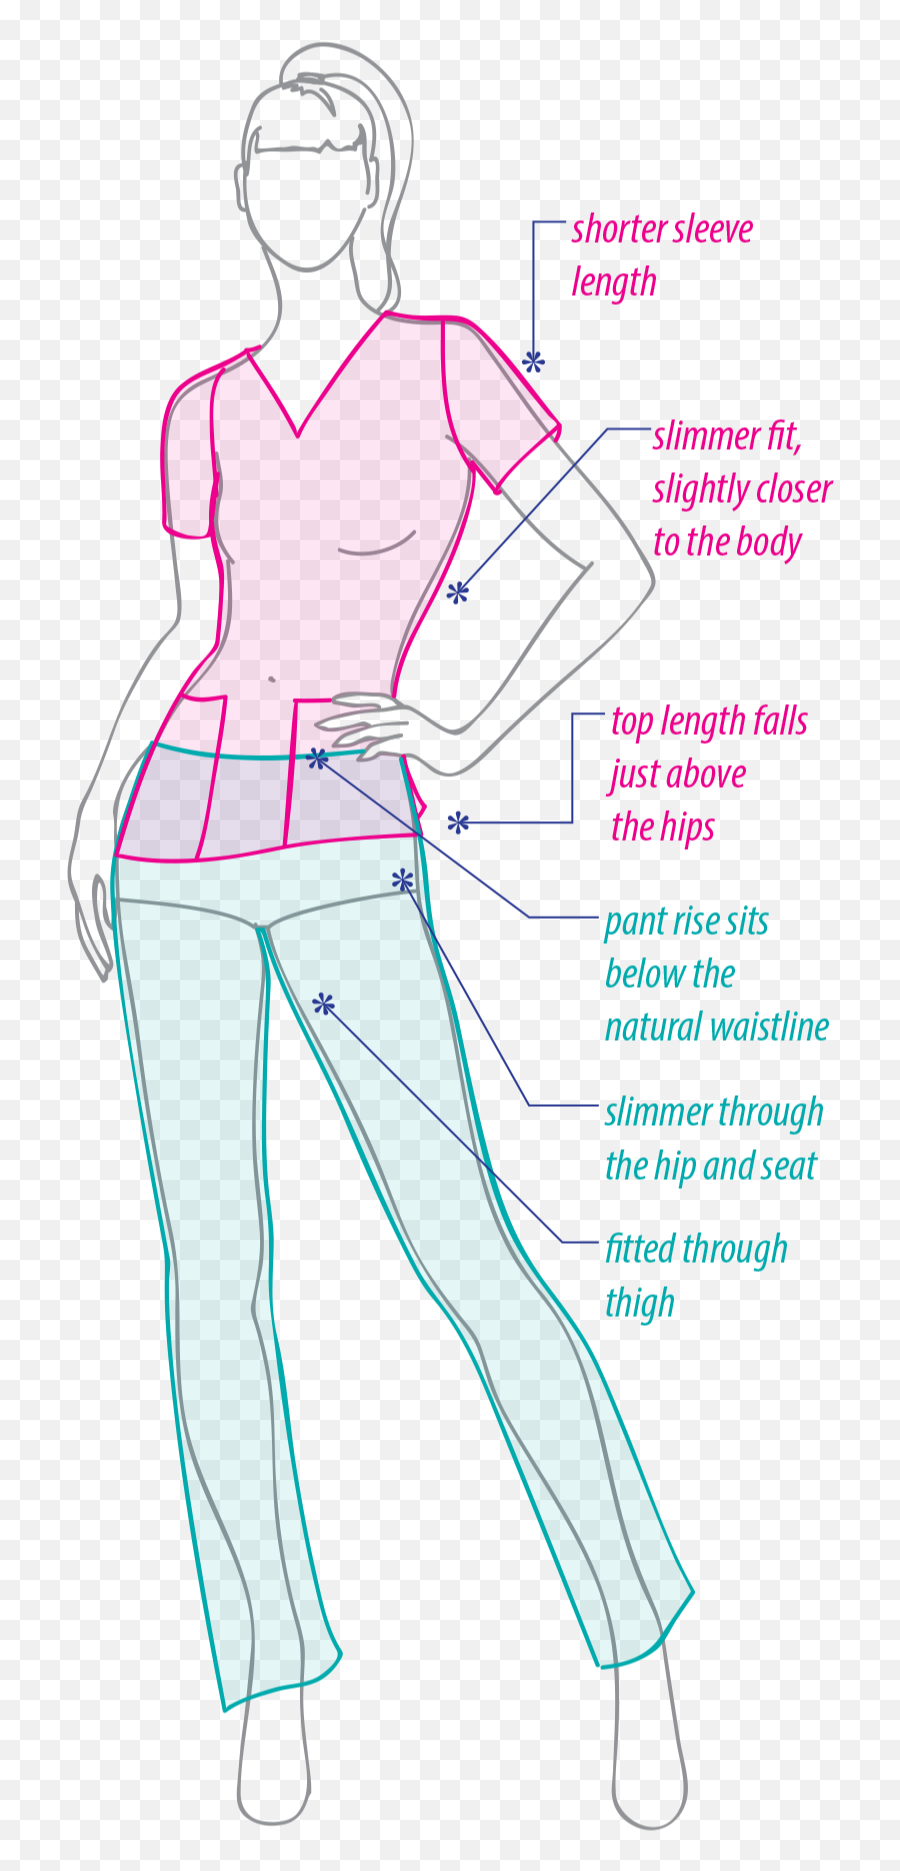 Scrubs Fit Guide Find Scrub Styles That Fit You U0026 See The - Should A Scrub Top Fit Emoji,Nurse Uniform Color And Emotion